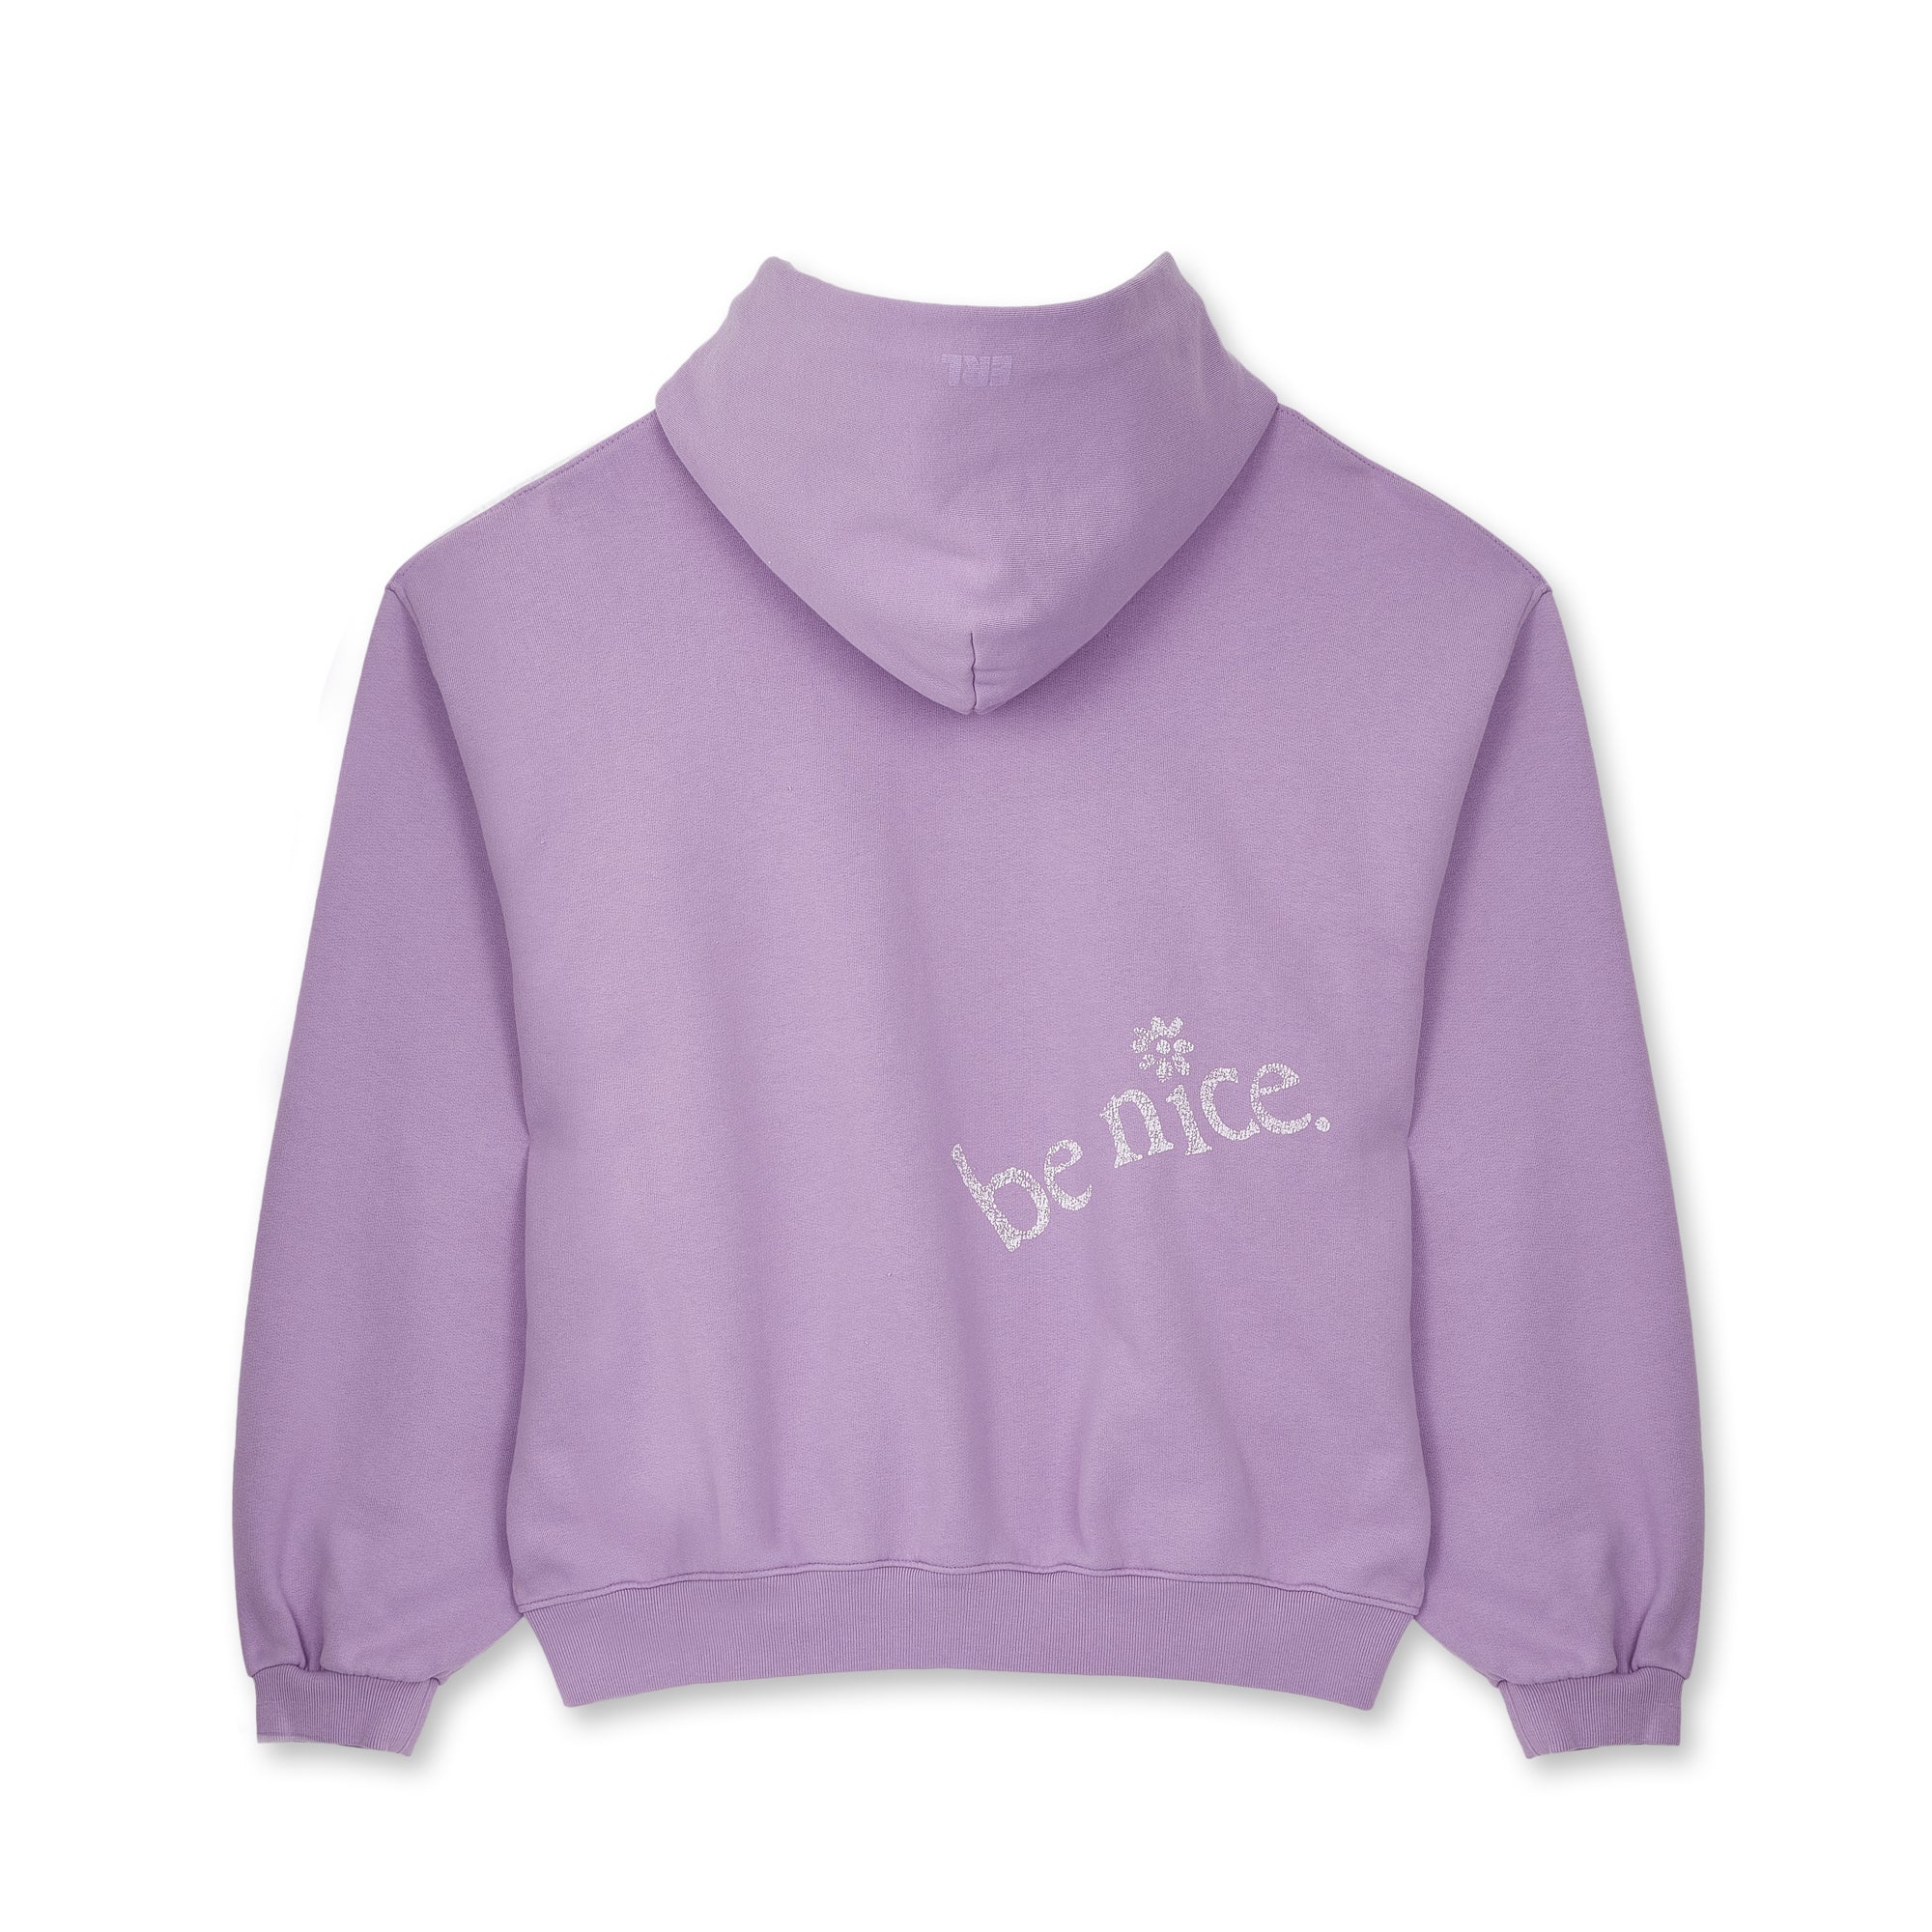 ERL - Men's Venice Hoodie - (Lilac) view 2